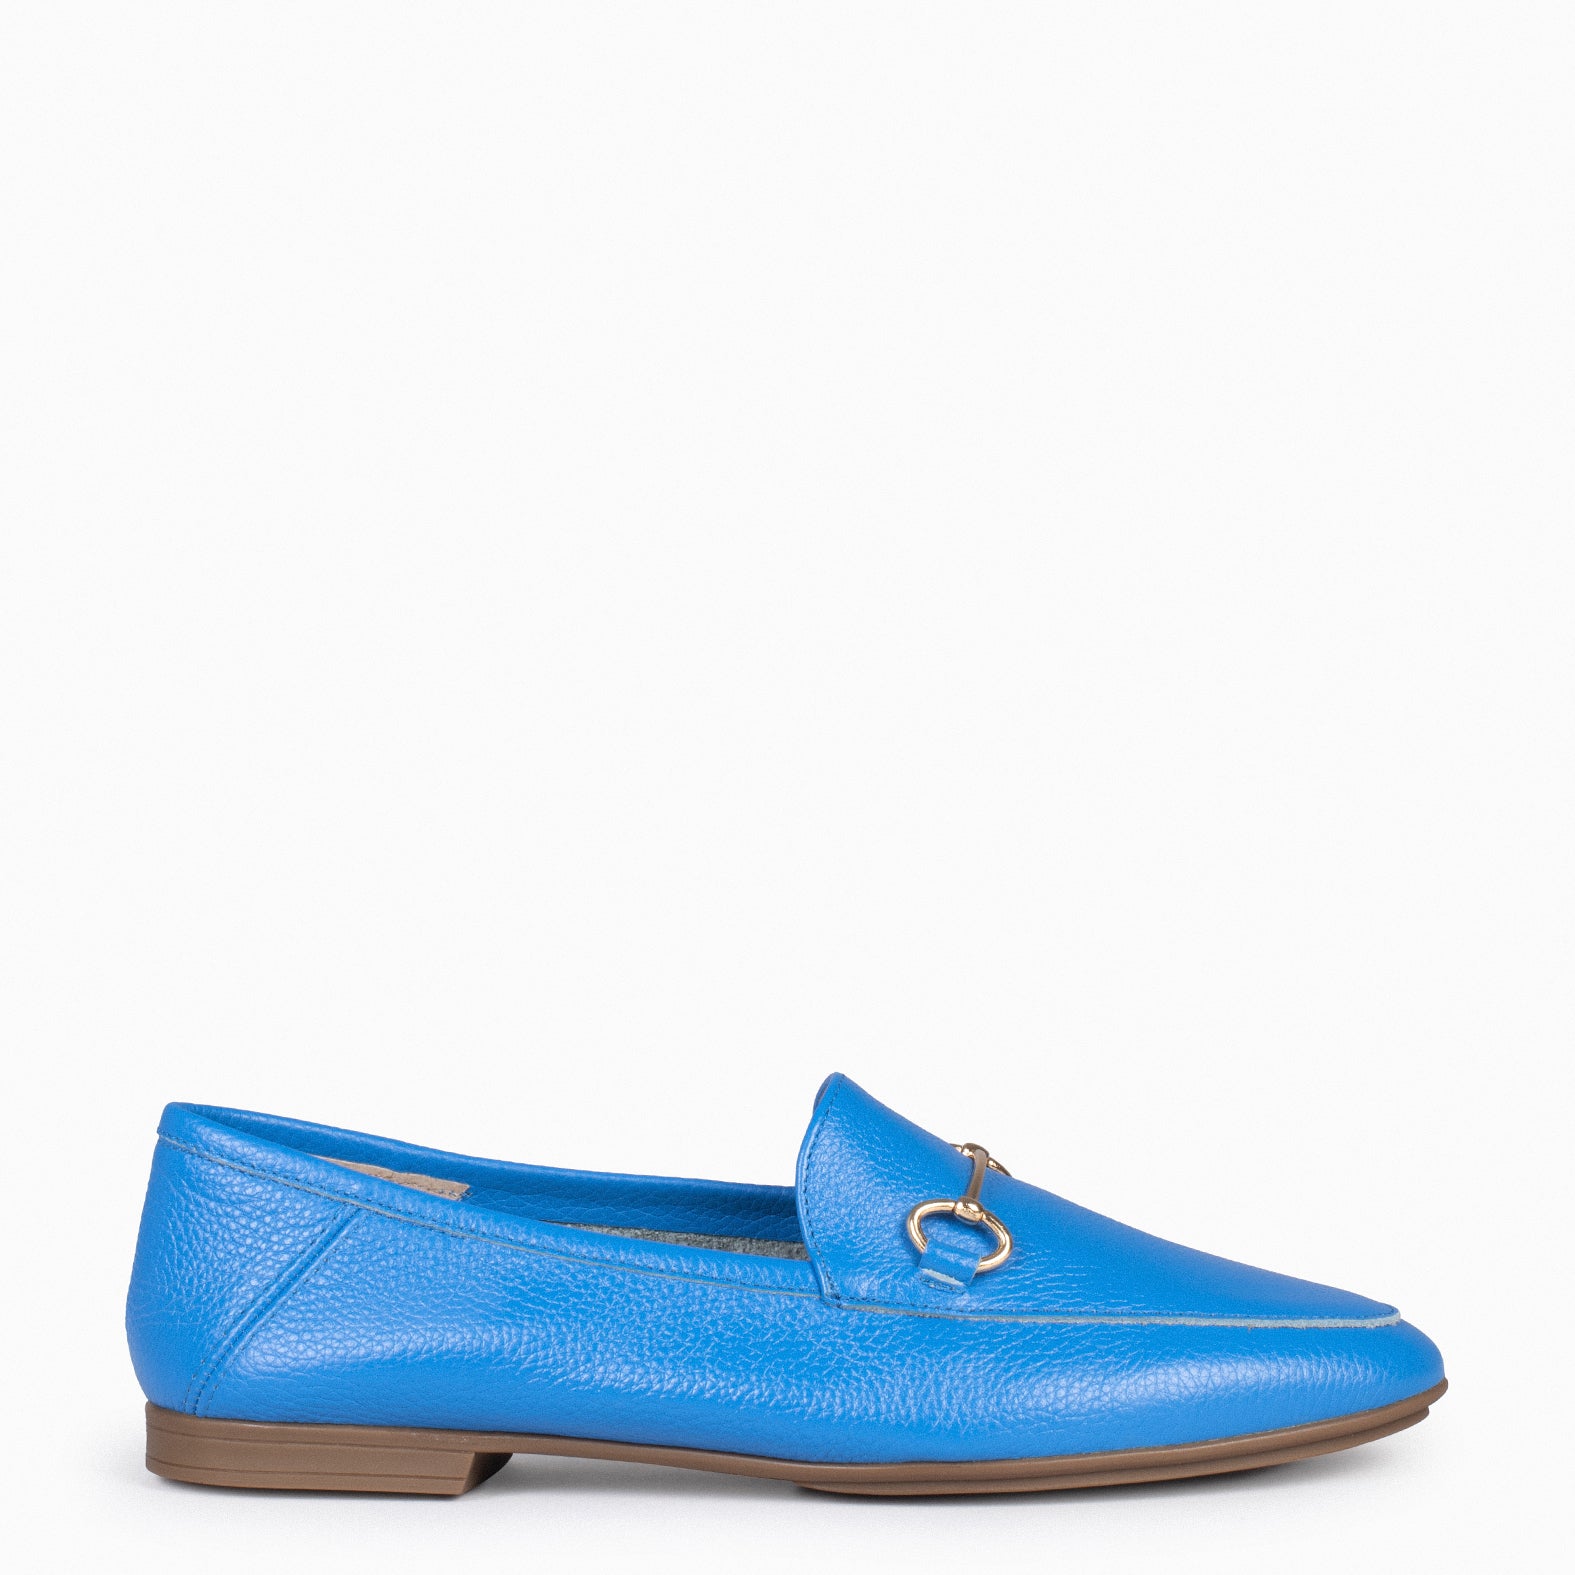 STYLE – BLUE moccasins with horsebit